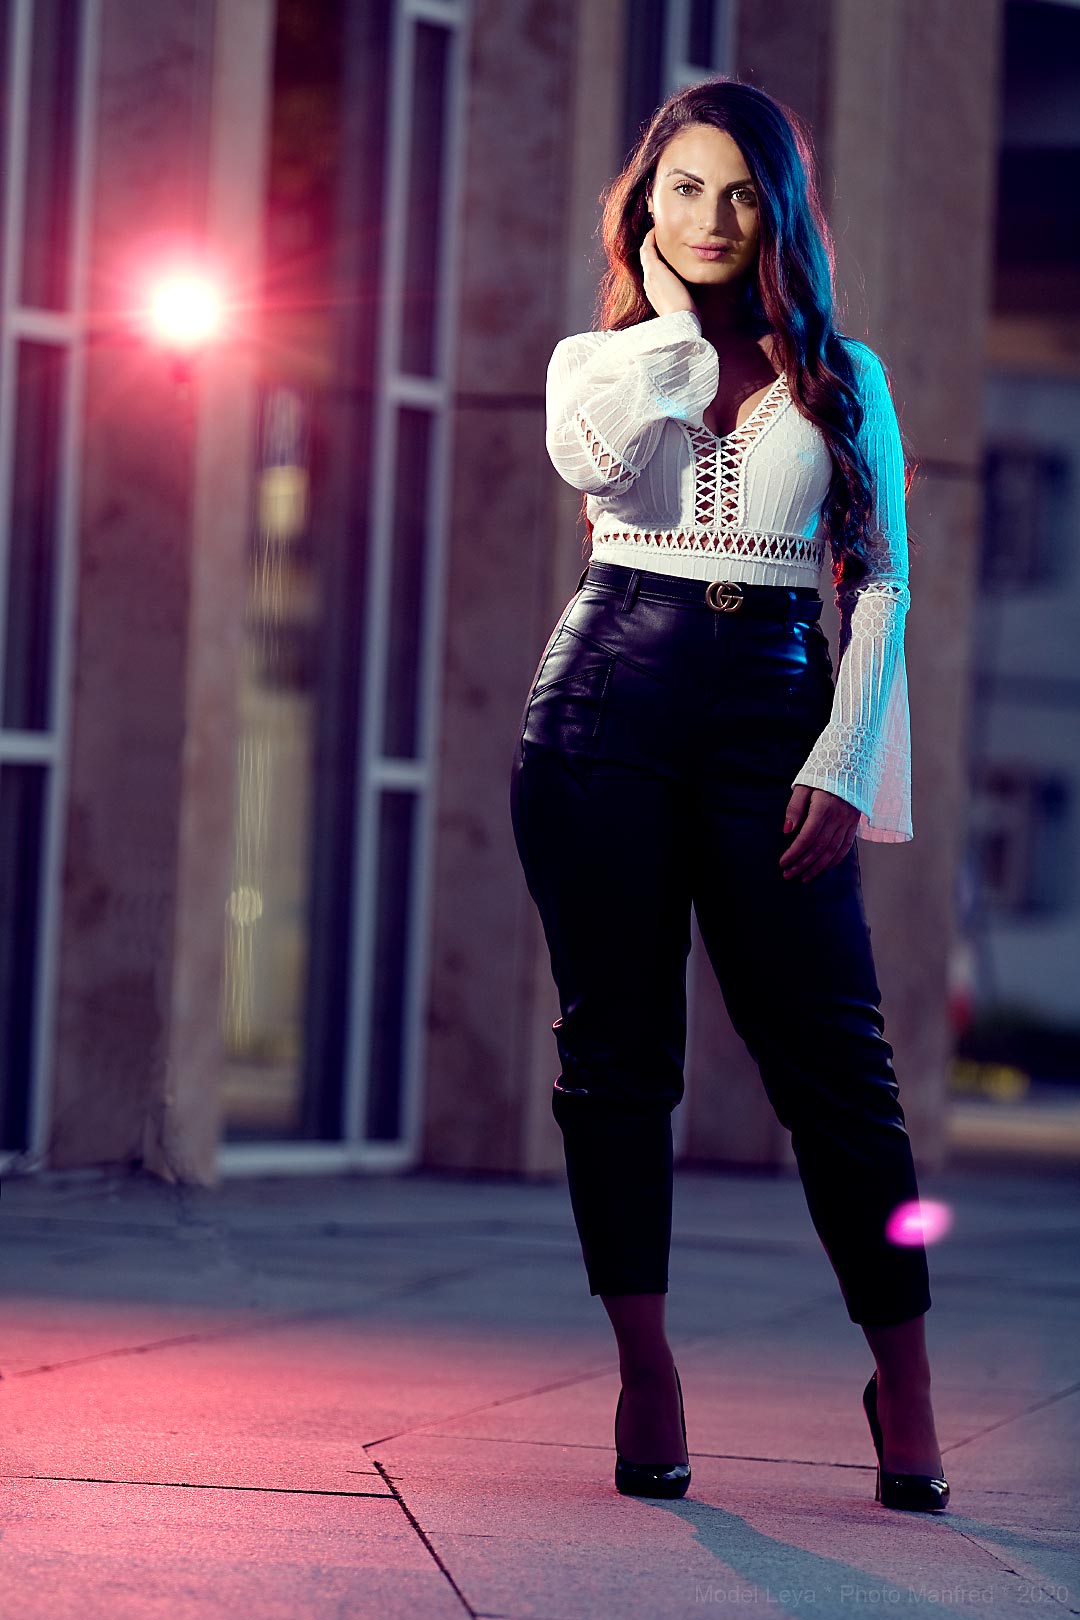 A young woman wearing leather trousers is standing in front of a building. In the background there is a red light.